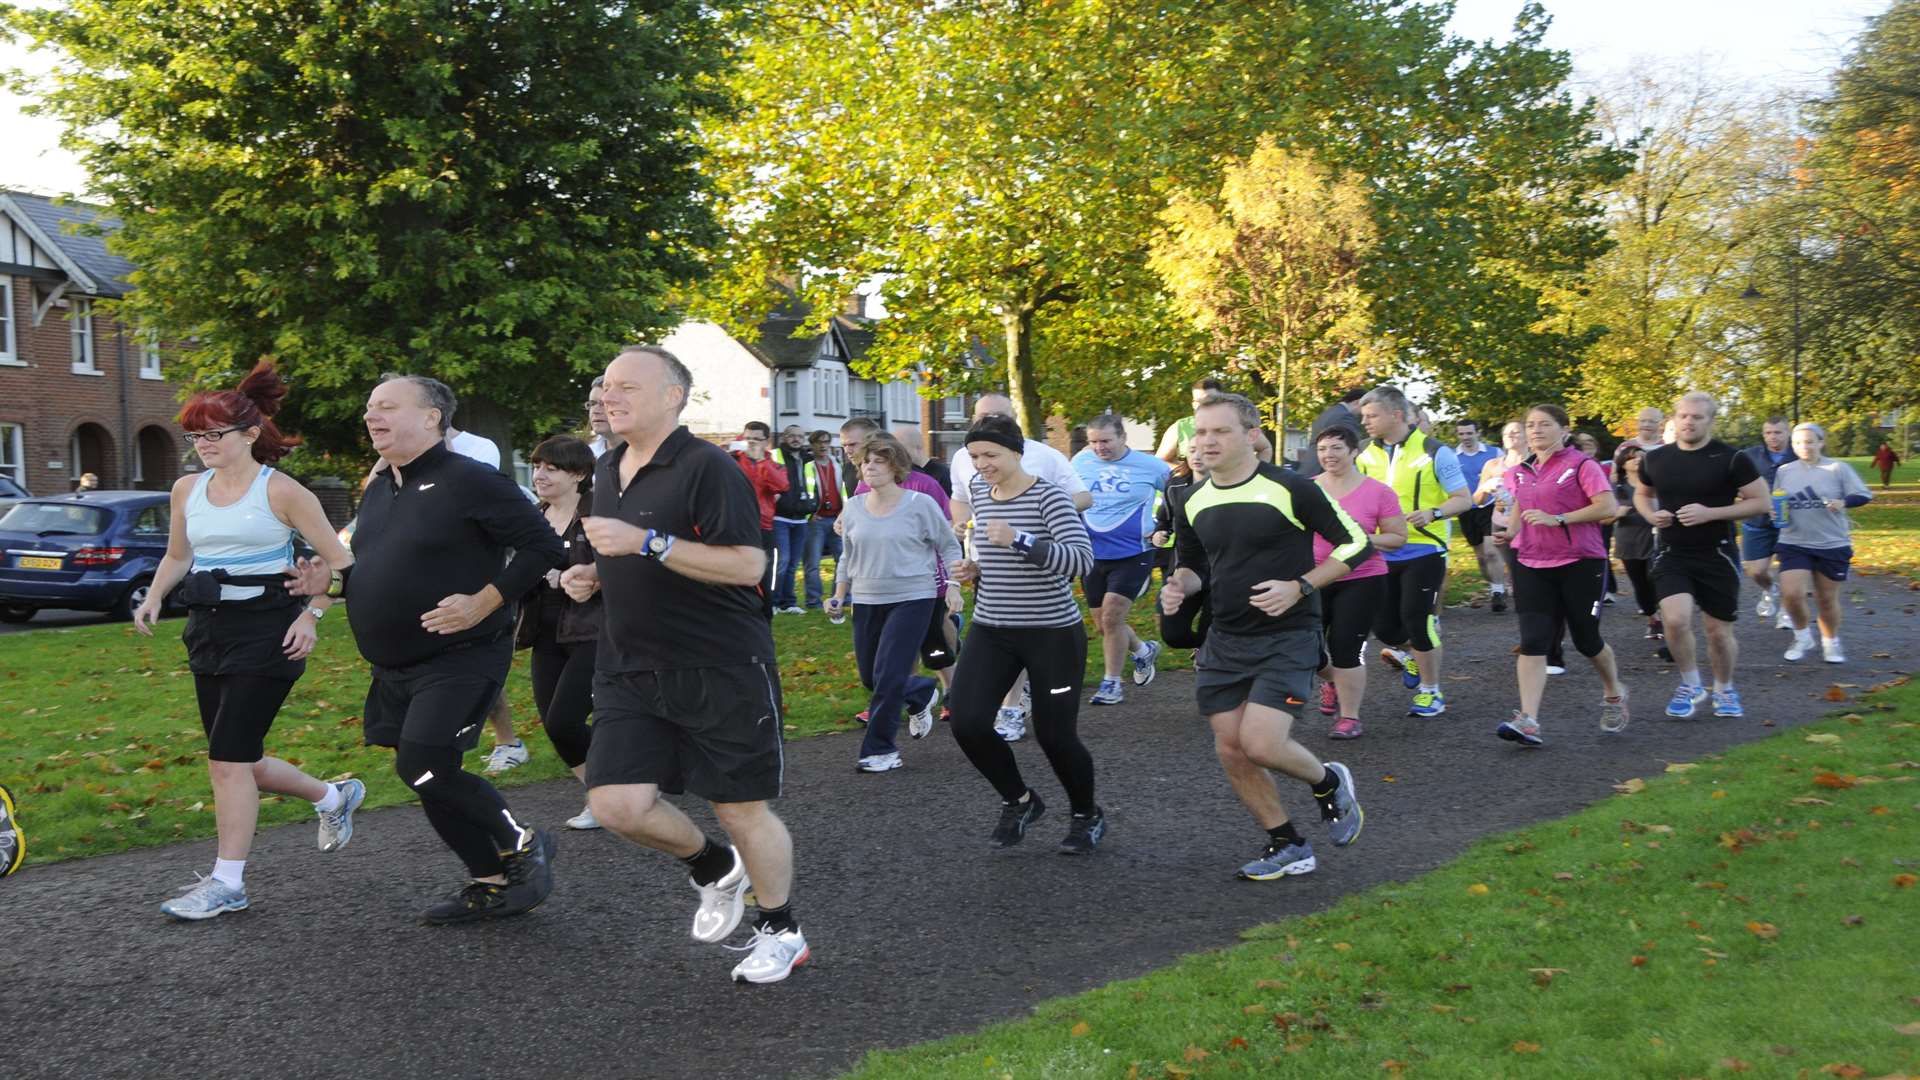 Runners taking part in Ashford's first Parkrun event in October 2013